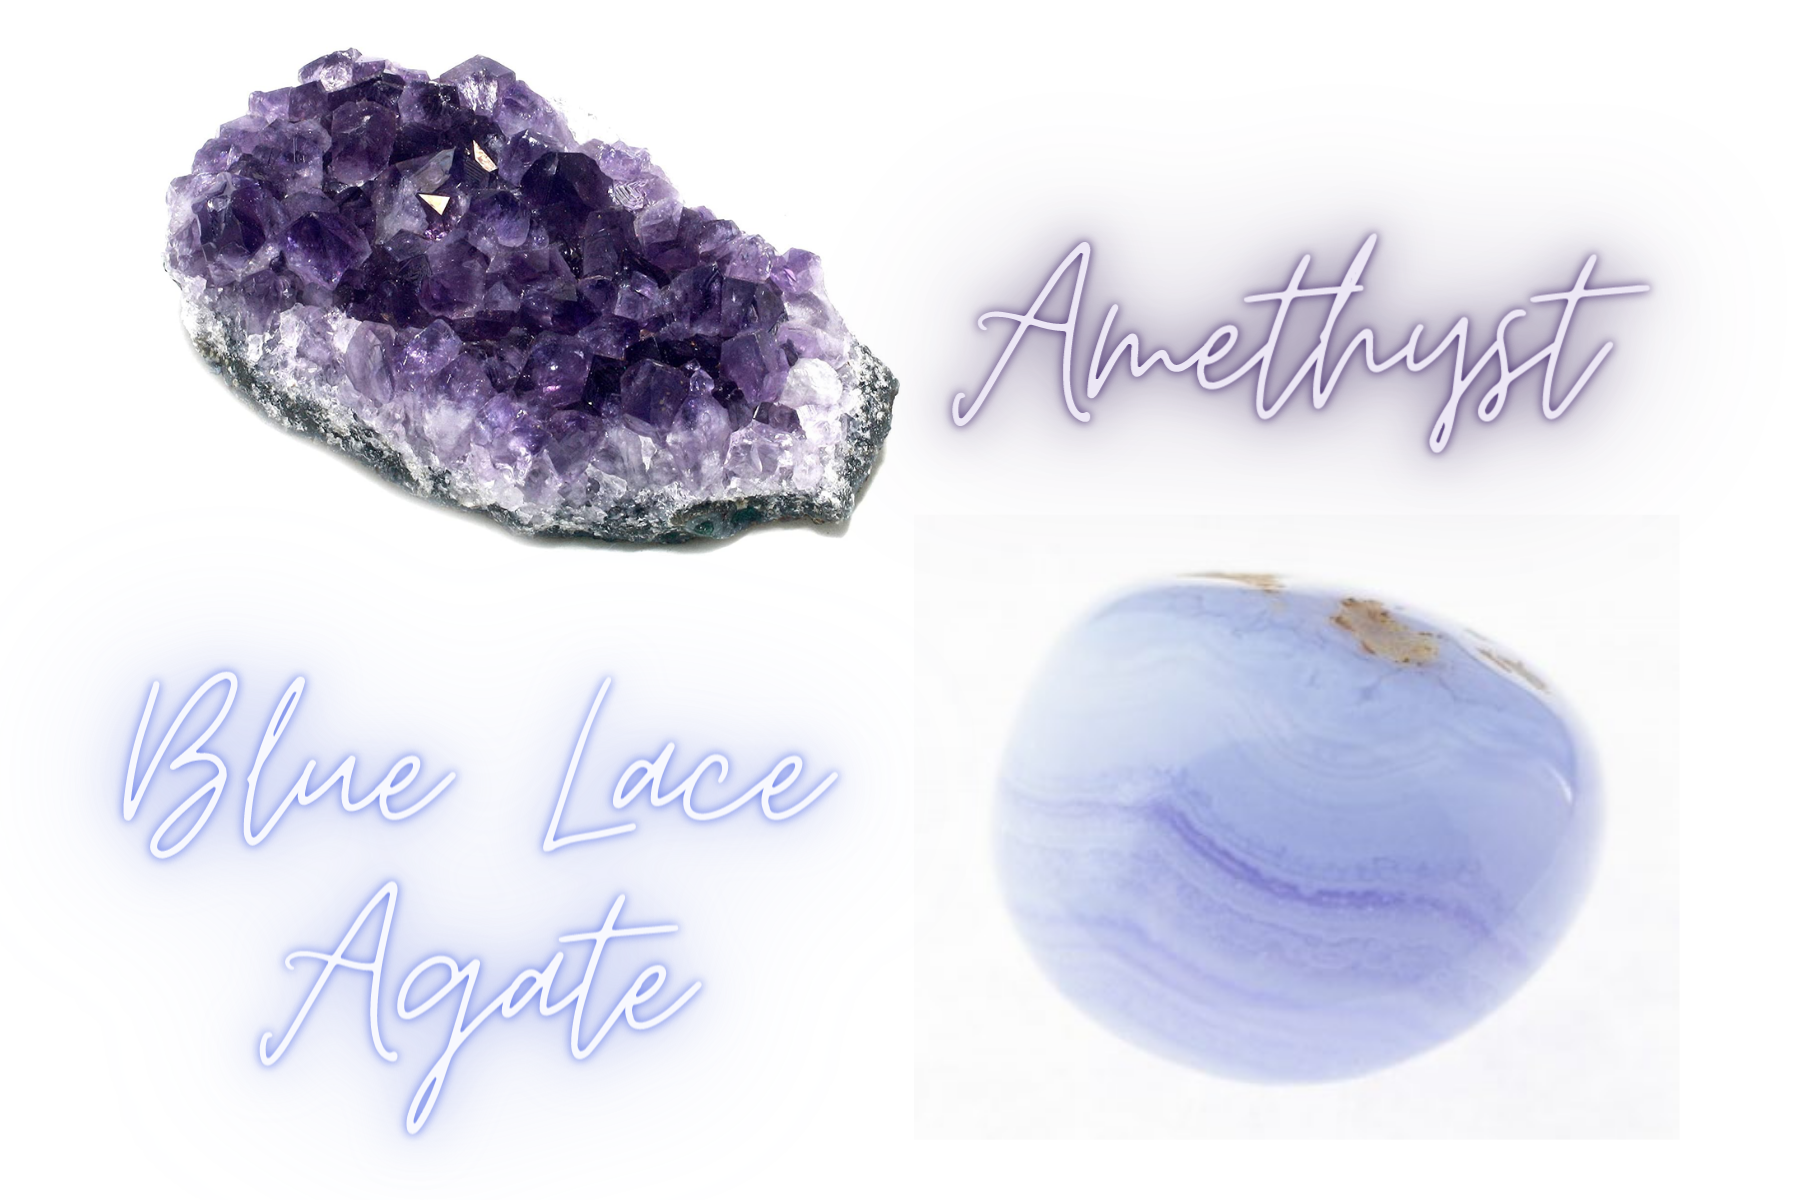 Amethyst and Blue Lace Agate crystals